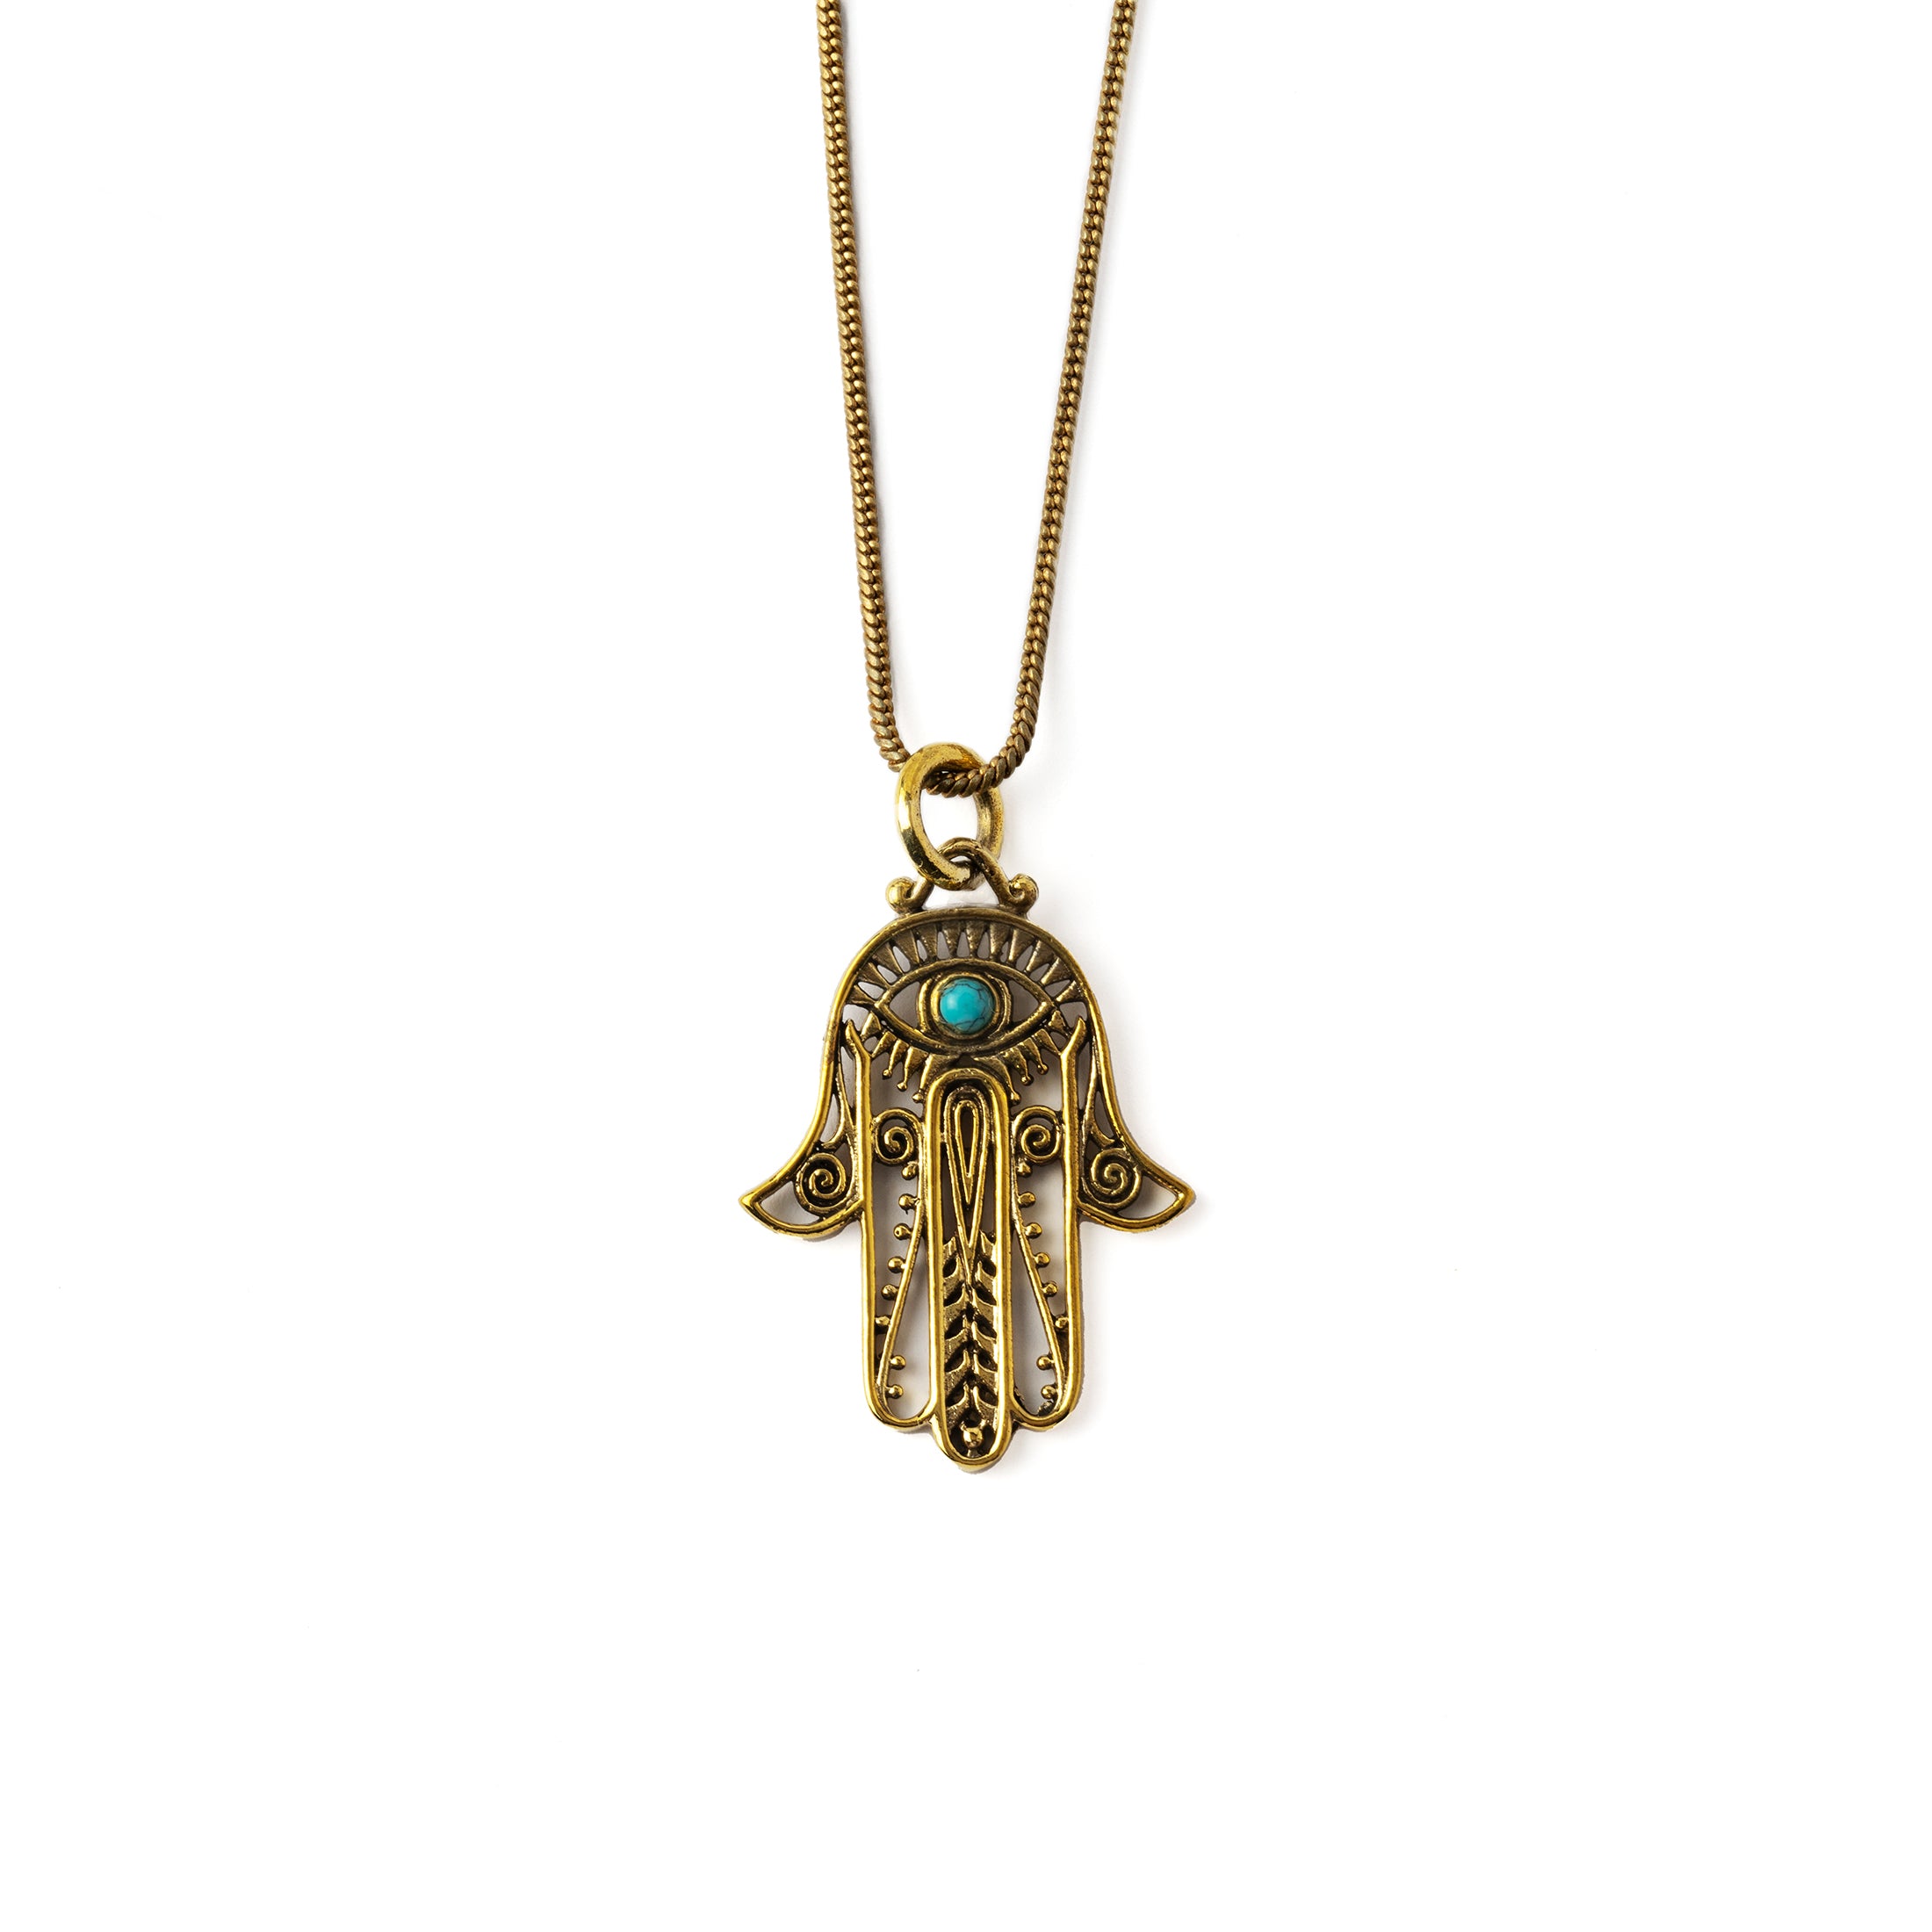 Hamsa Evil Eye Necklace frontal view with Turquoise